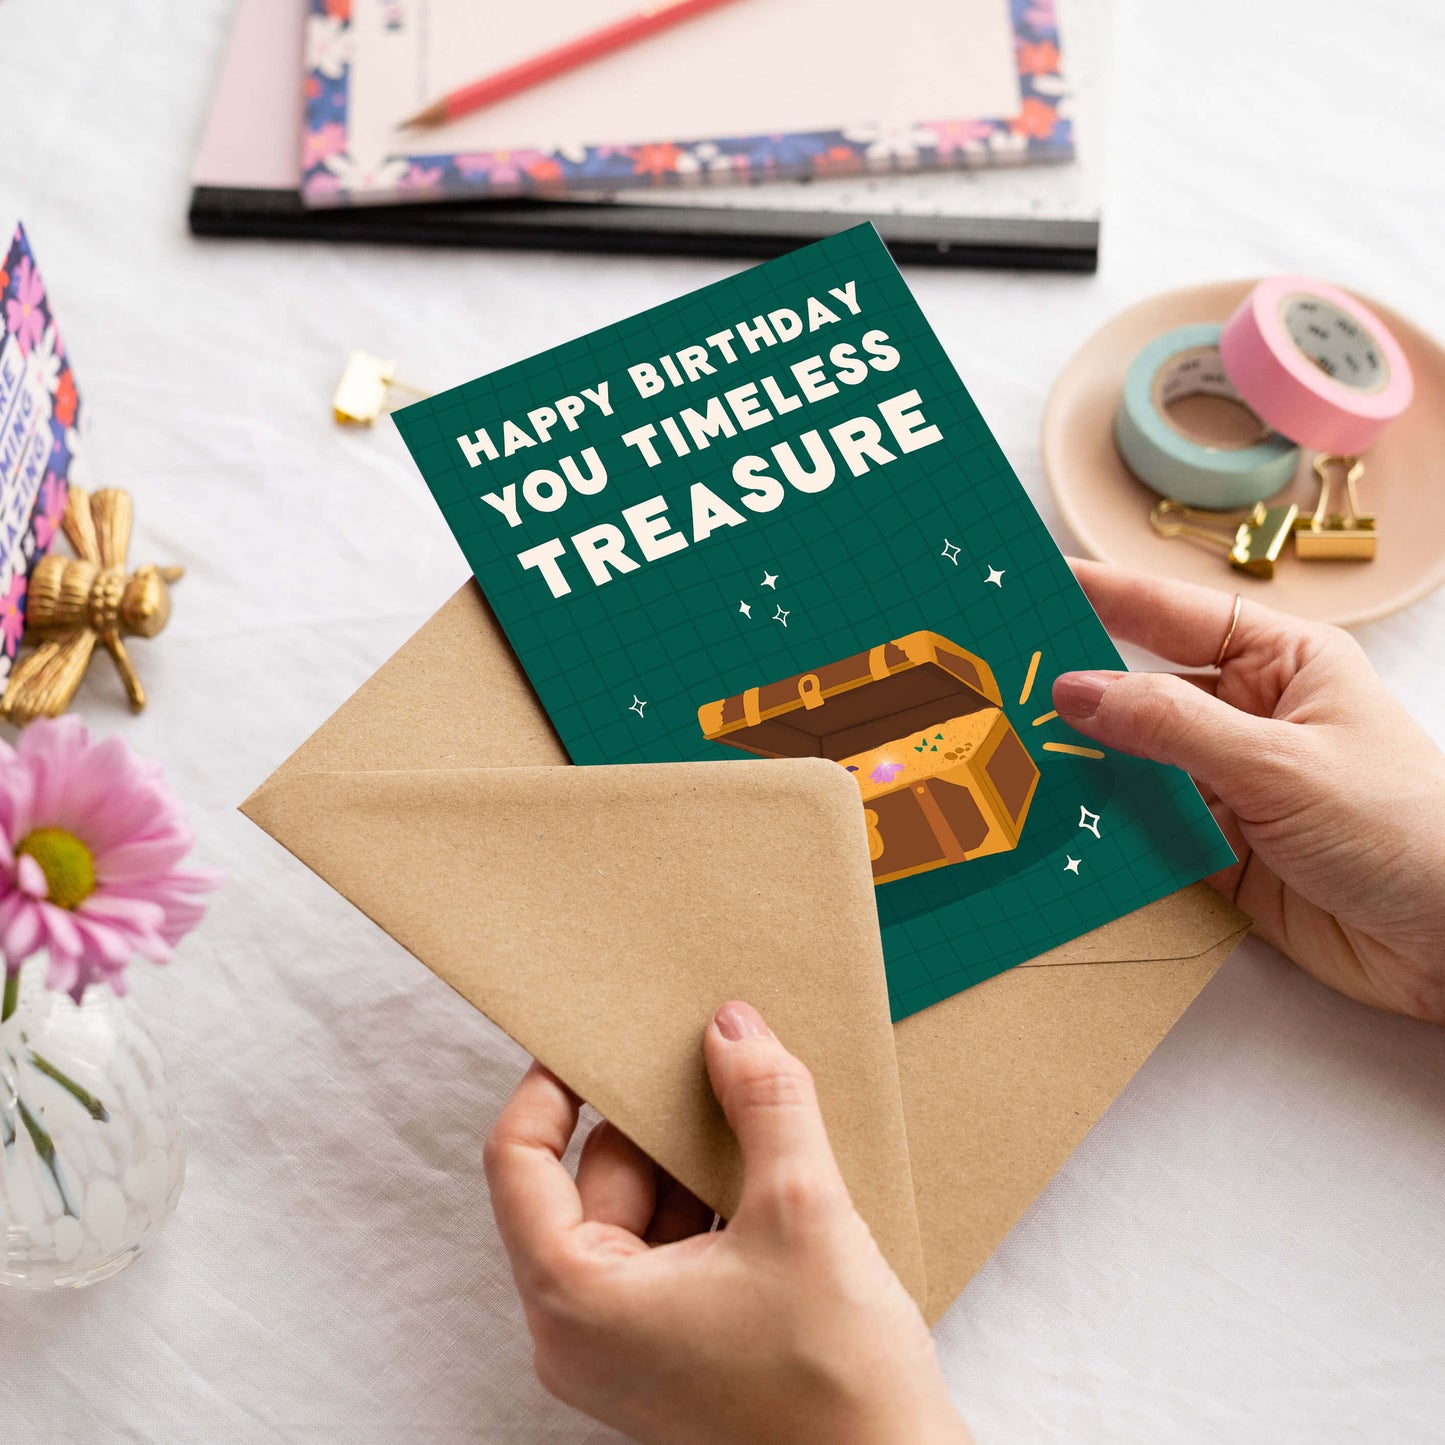 Timeless Treasure Birthday Card | All Ages Birthday Cards | Age Joke Birthday Card